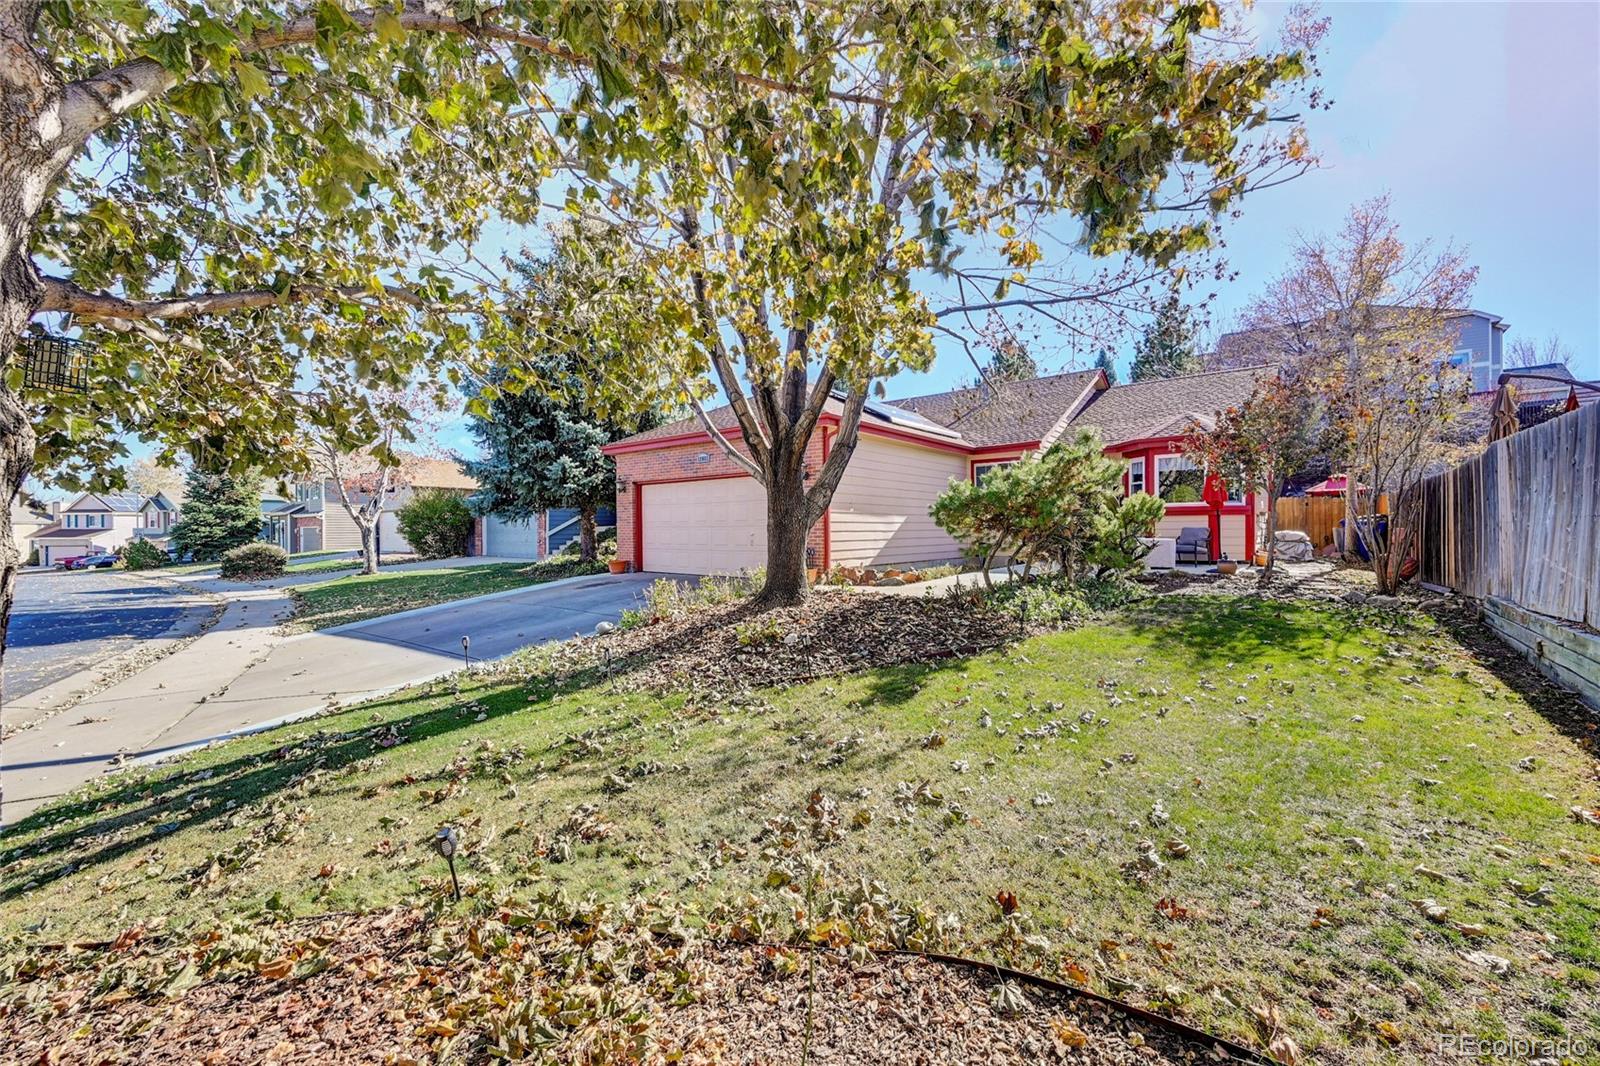 Report Image for 12082 W 84th Place,Arvada, Colorado